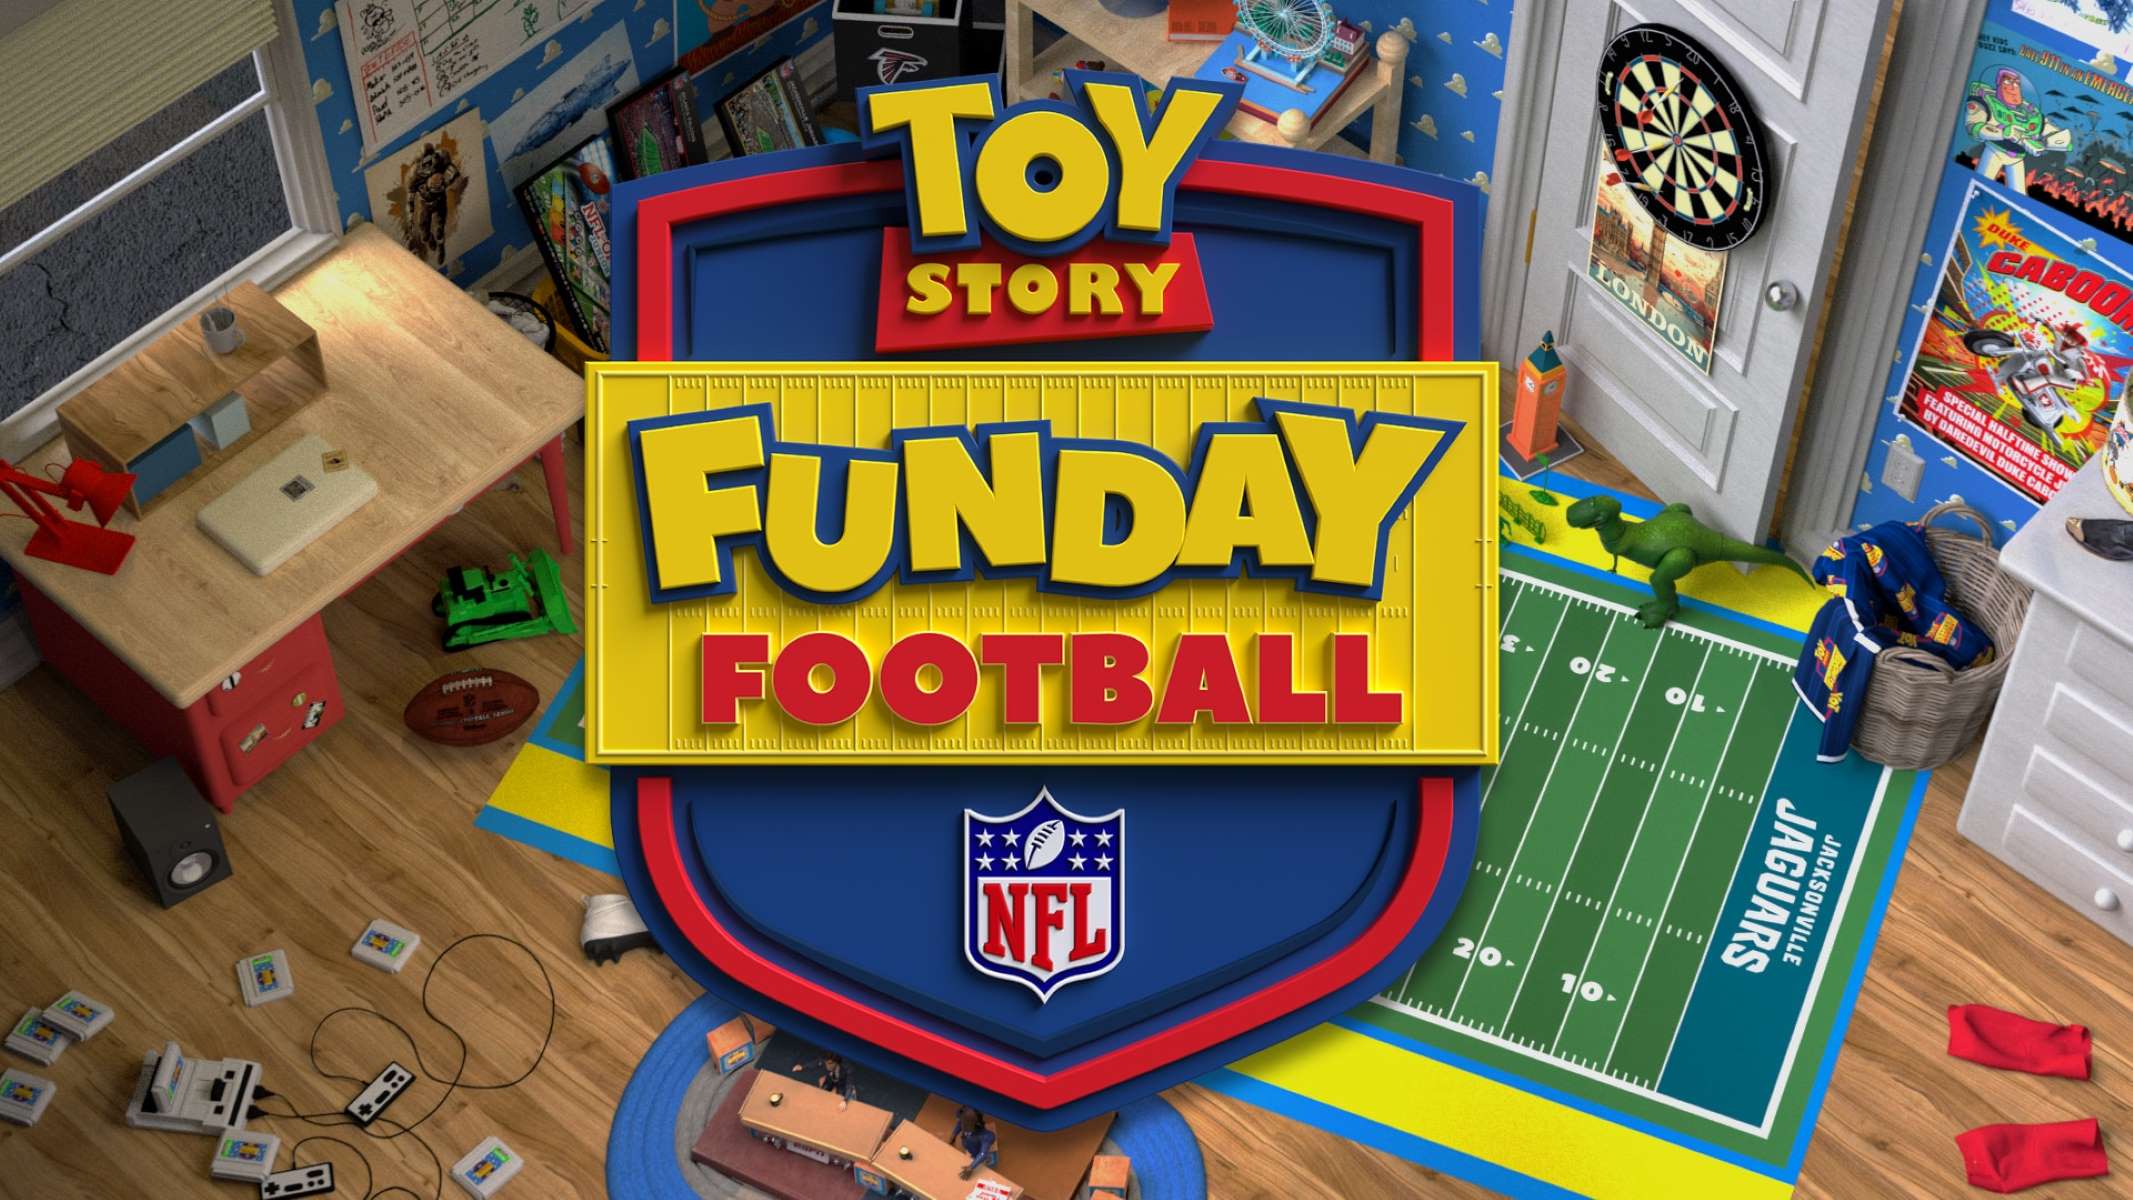 disney-and-espn-to-host-animated-nfl-game-toy-story-funday-football